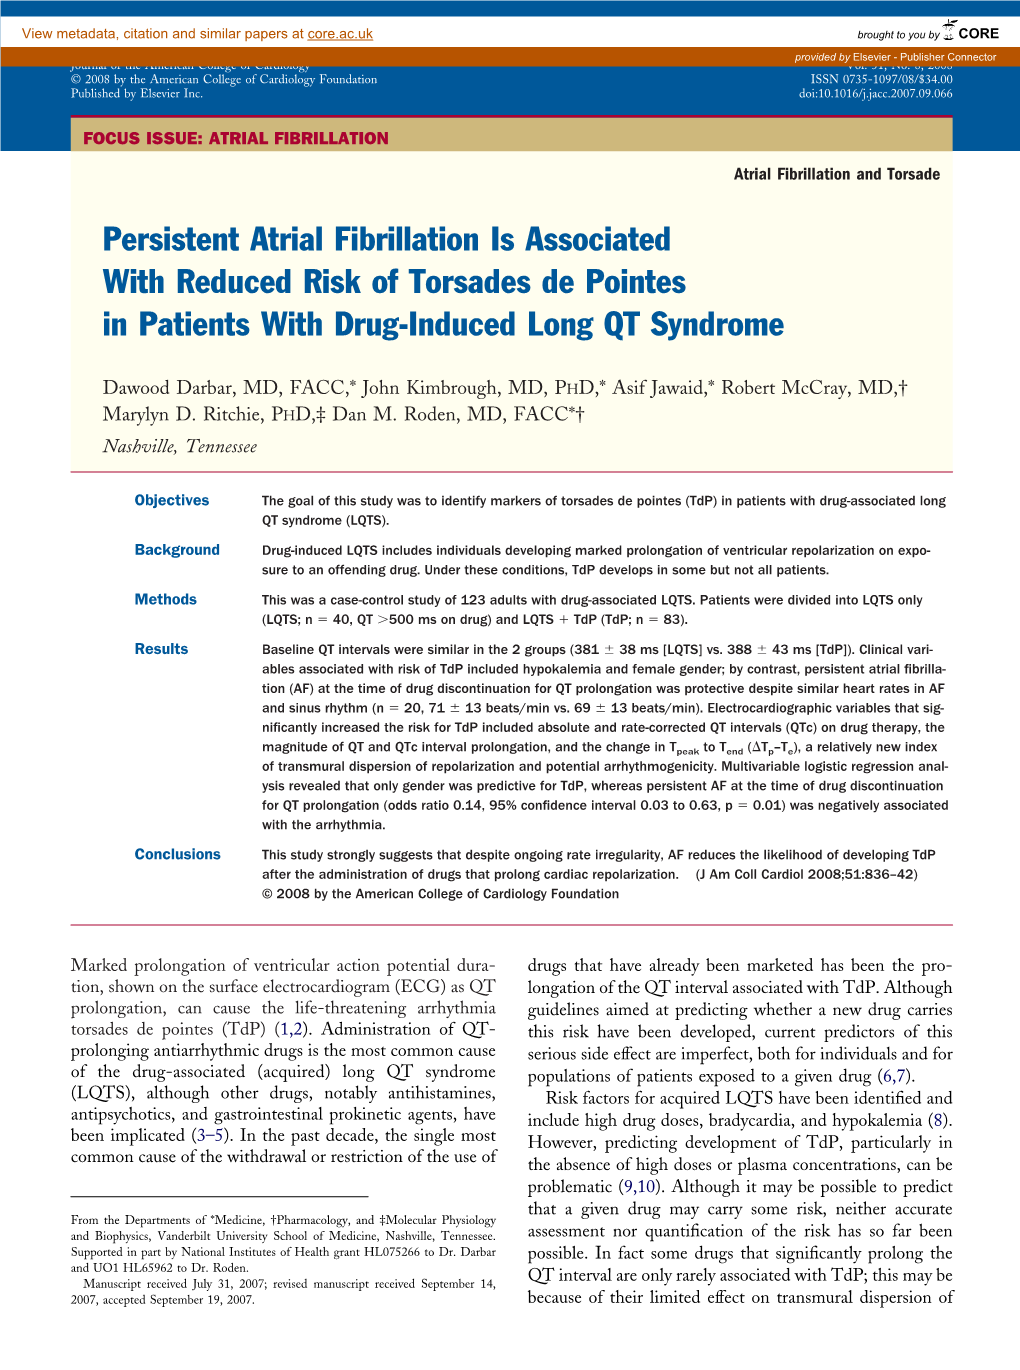 Persistent Atrial Fibrillation Is Associated with Reduced Risk of Torsades De Pointes in Patients with Drug-Induced Long QT Syndrome